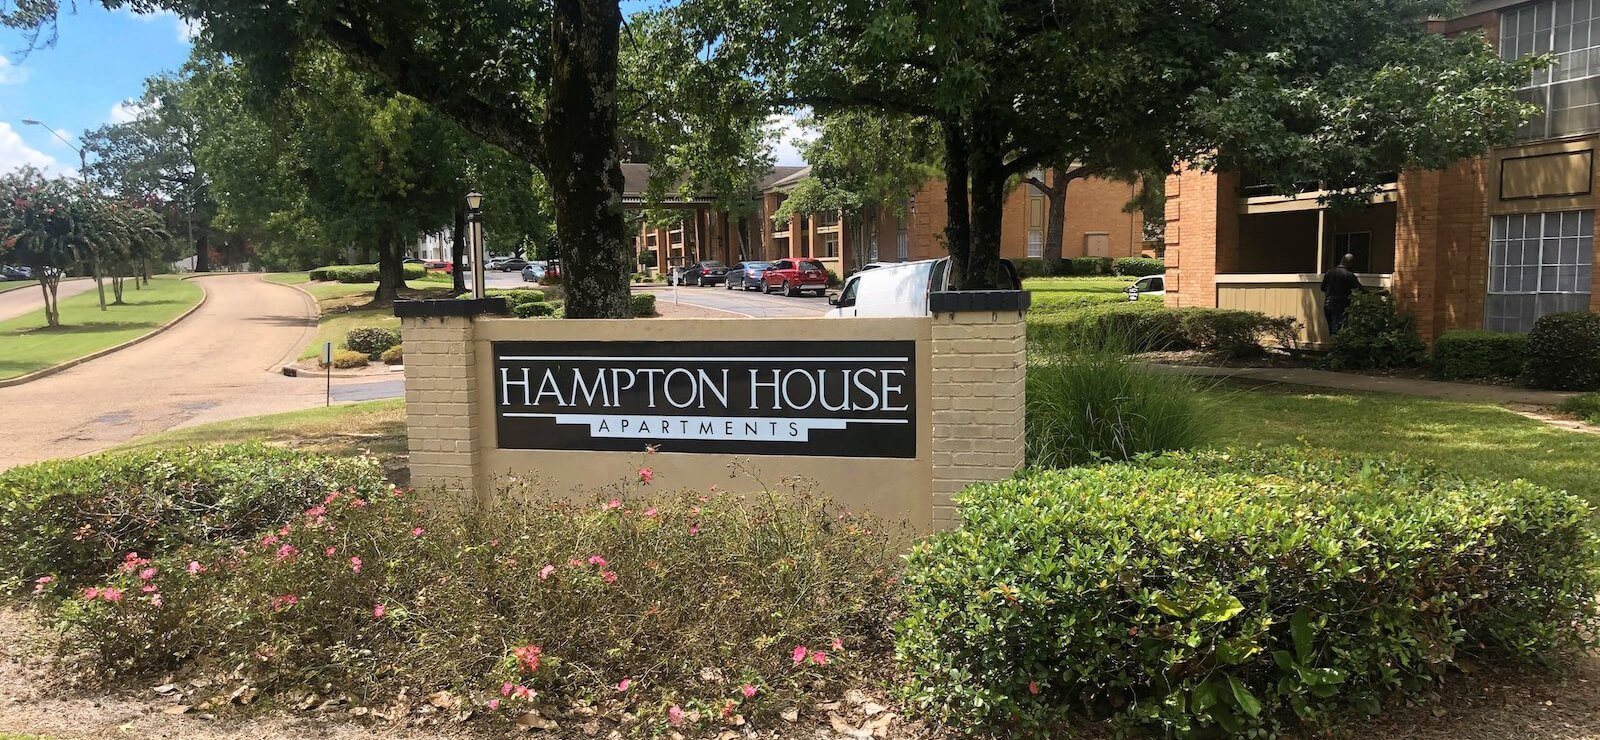 lush landscaping and mature trees beside Hampton House Apartments sign